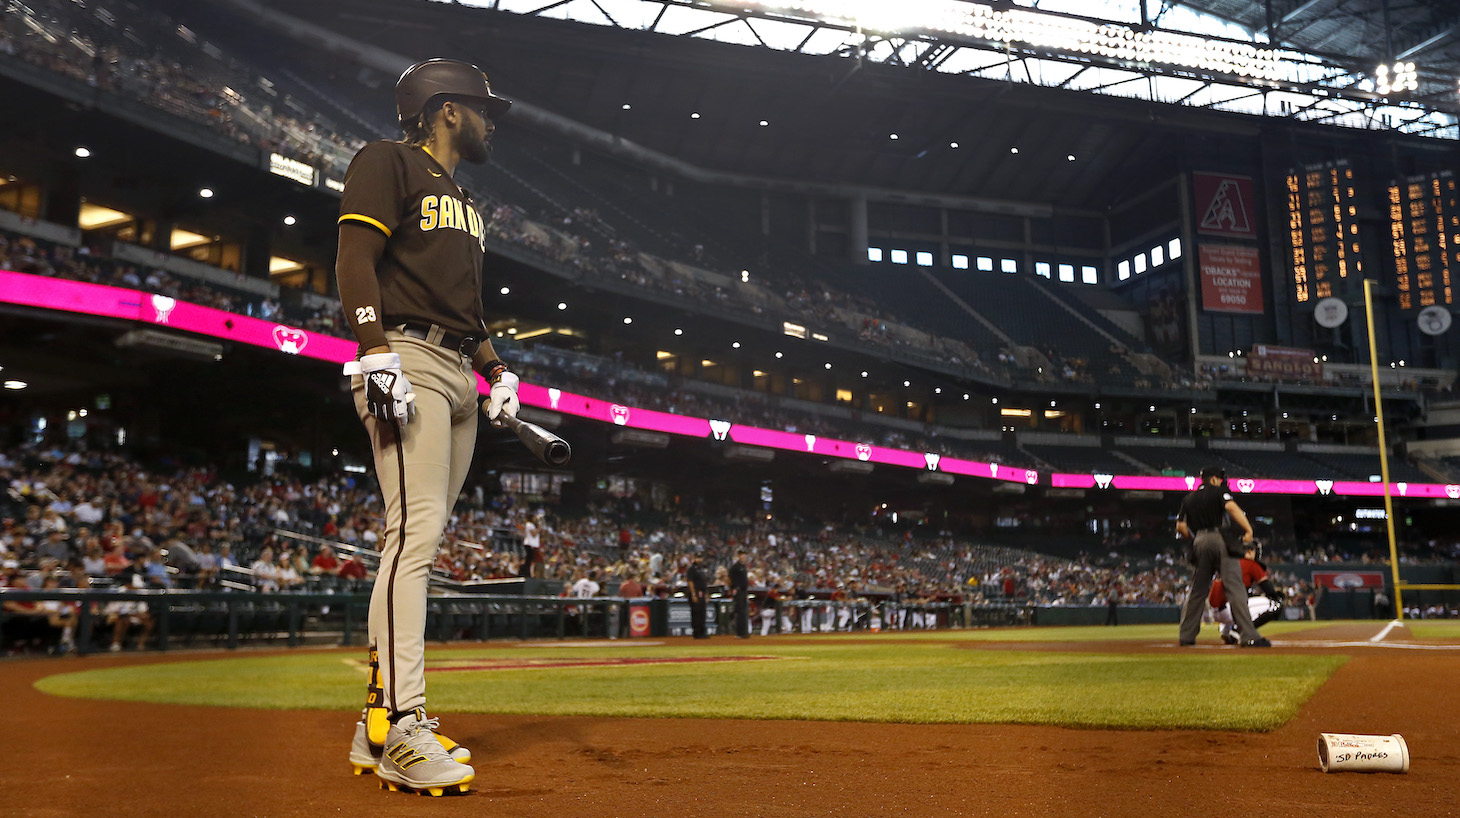 PHOENIX, ARIZONA - AUGUST 15: Fernando Tatis Jr #23 of the San Diego Padres waits to bat against the Arizona Diamondbacks during the first inning of the MLB game at Chase Field on August 15, 2021 in Phoenix, Arizona. (Photo by Ralph Freso/Getty Images)